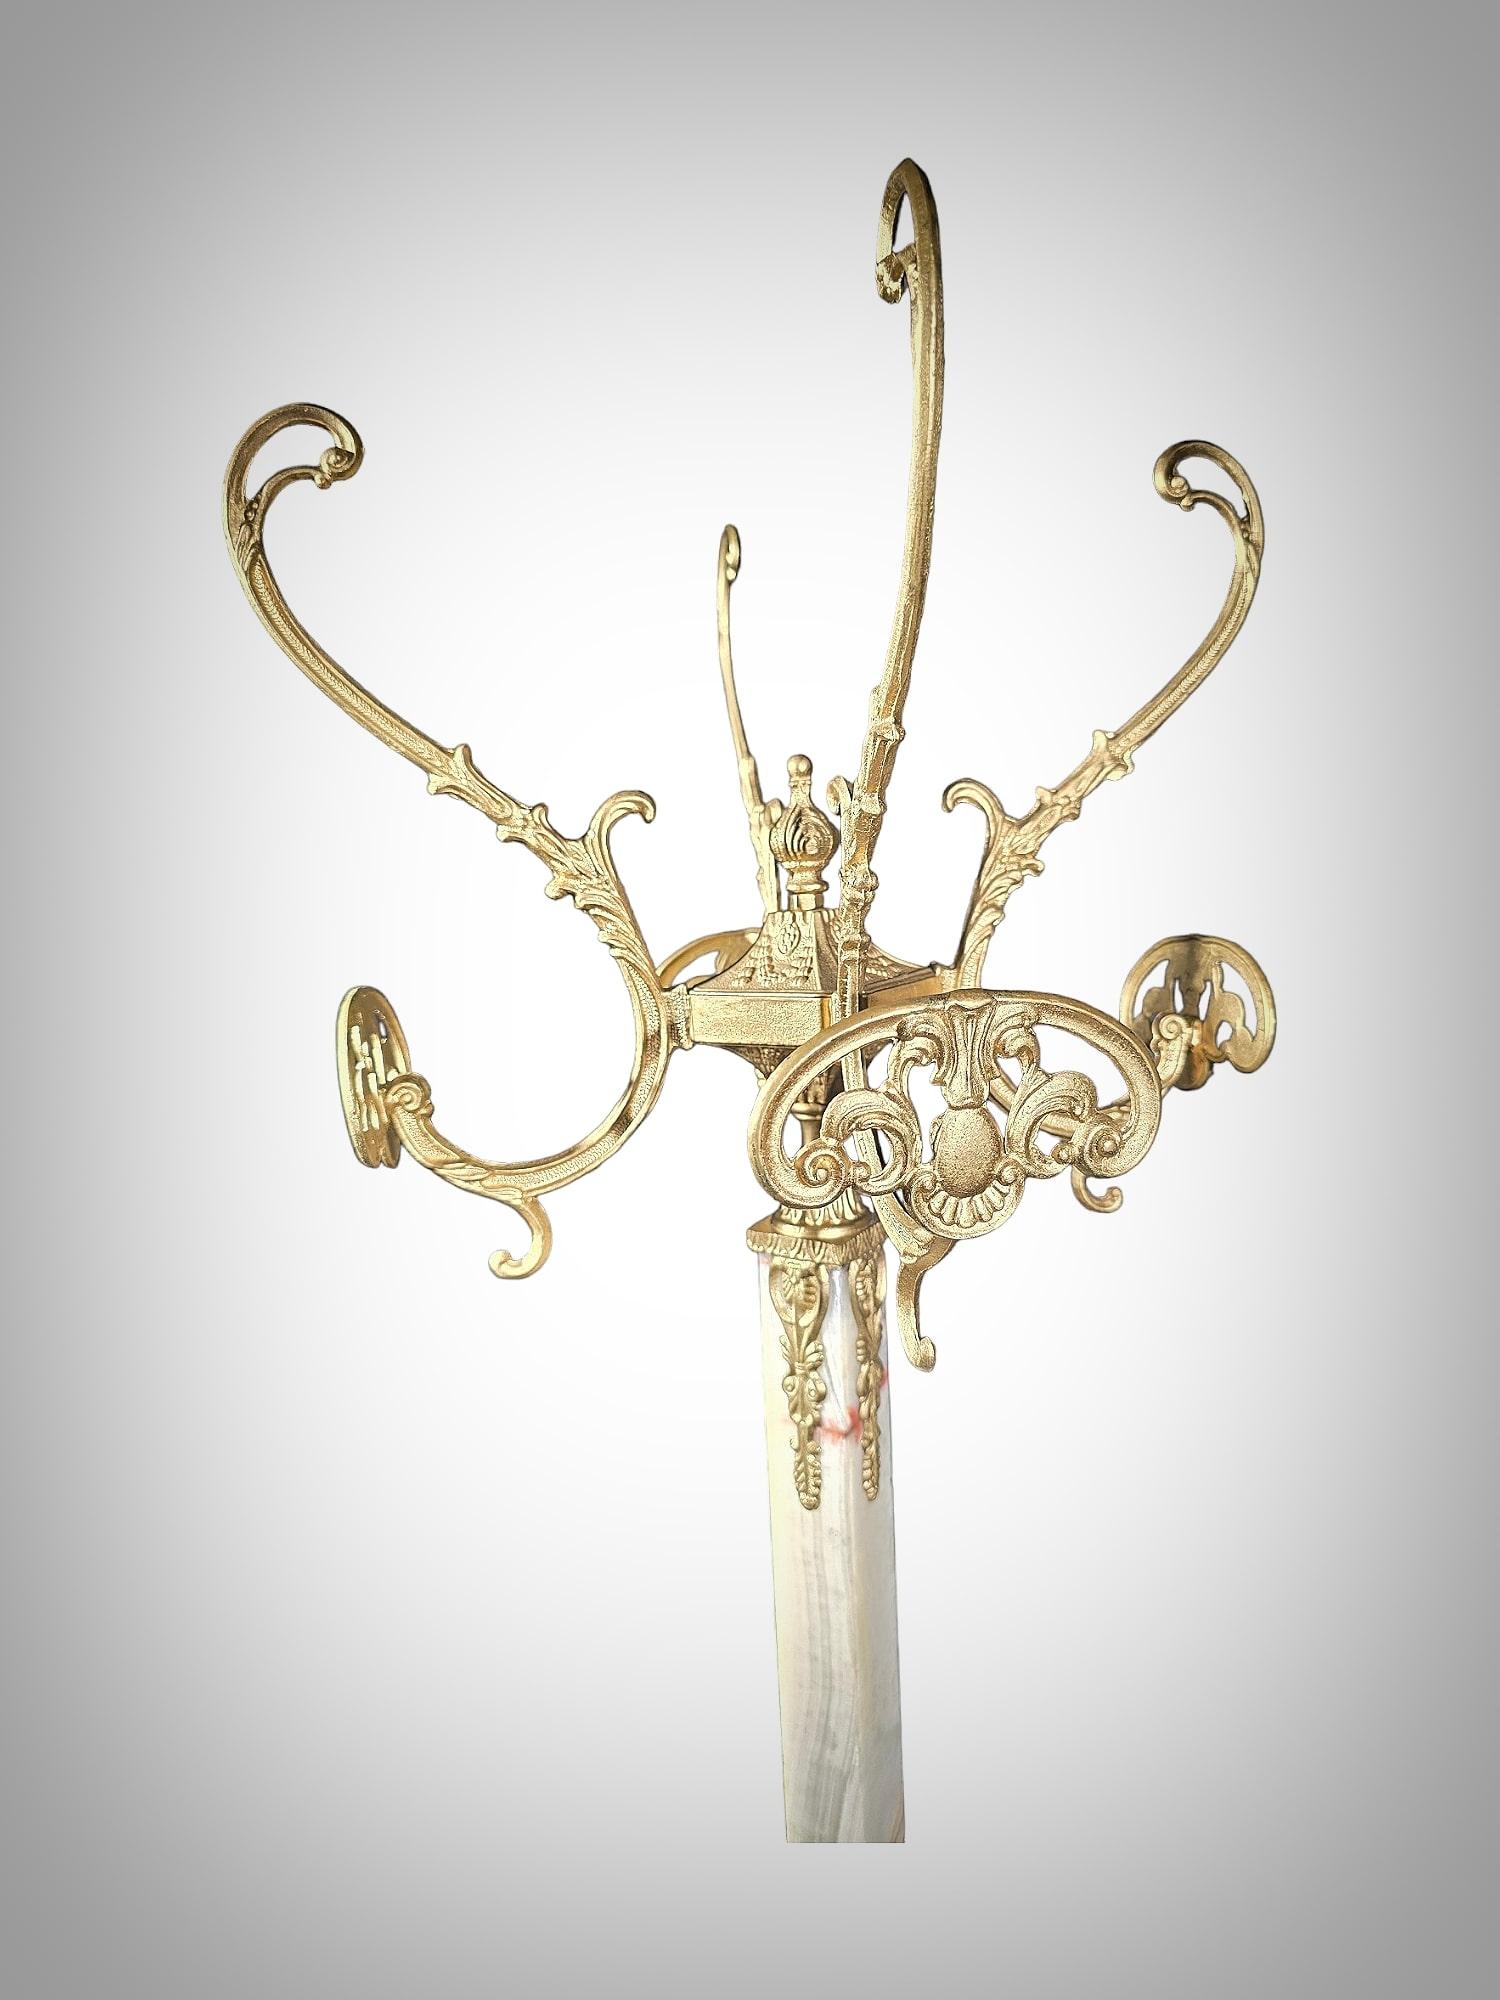 Add a touch of elegance and sophistication to your interior with this exquisite onyx and gilt bronze coat rack, in the Art Nouveau style, dating back to the 1900s. This piece exudes the characteristic charm and grace of the era, serving as a true